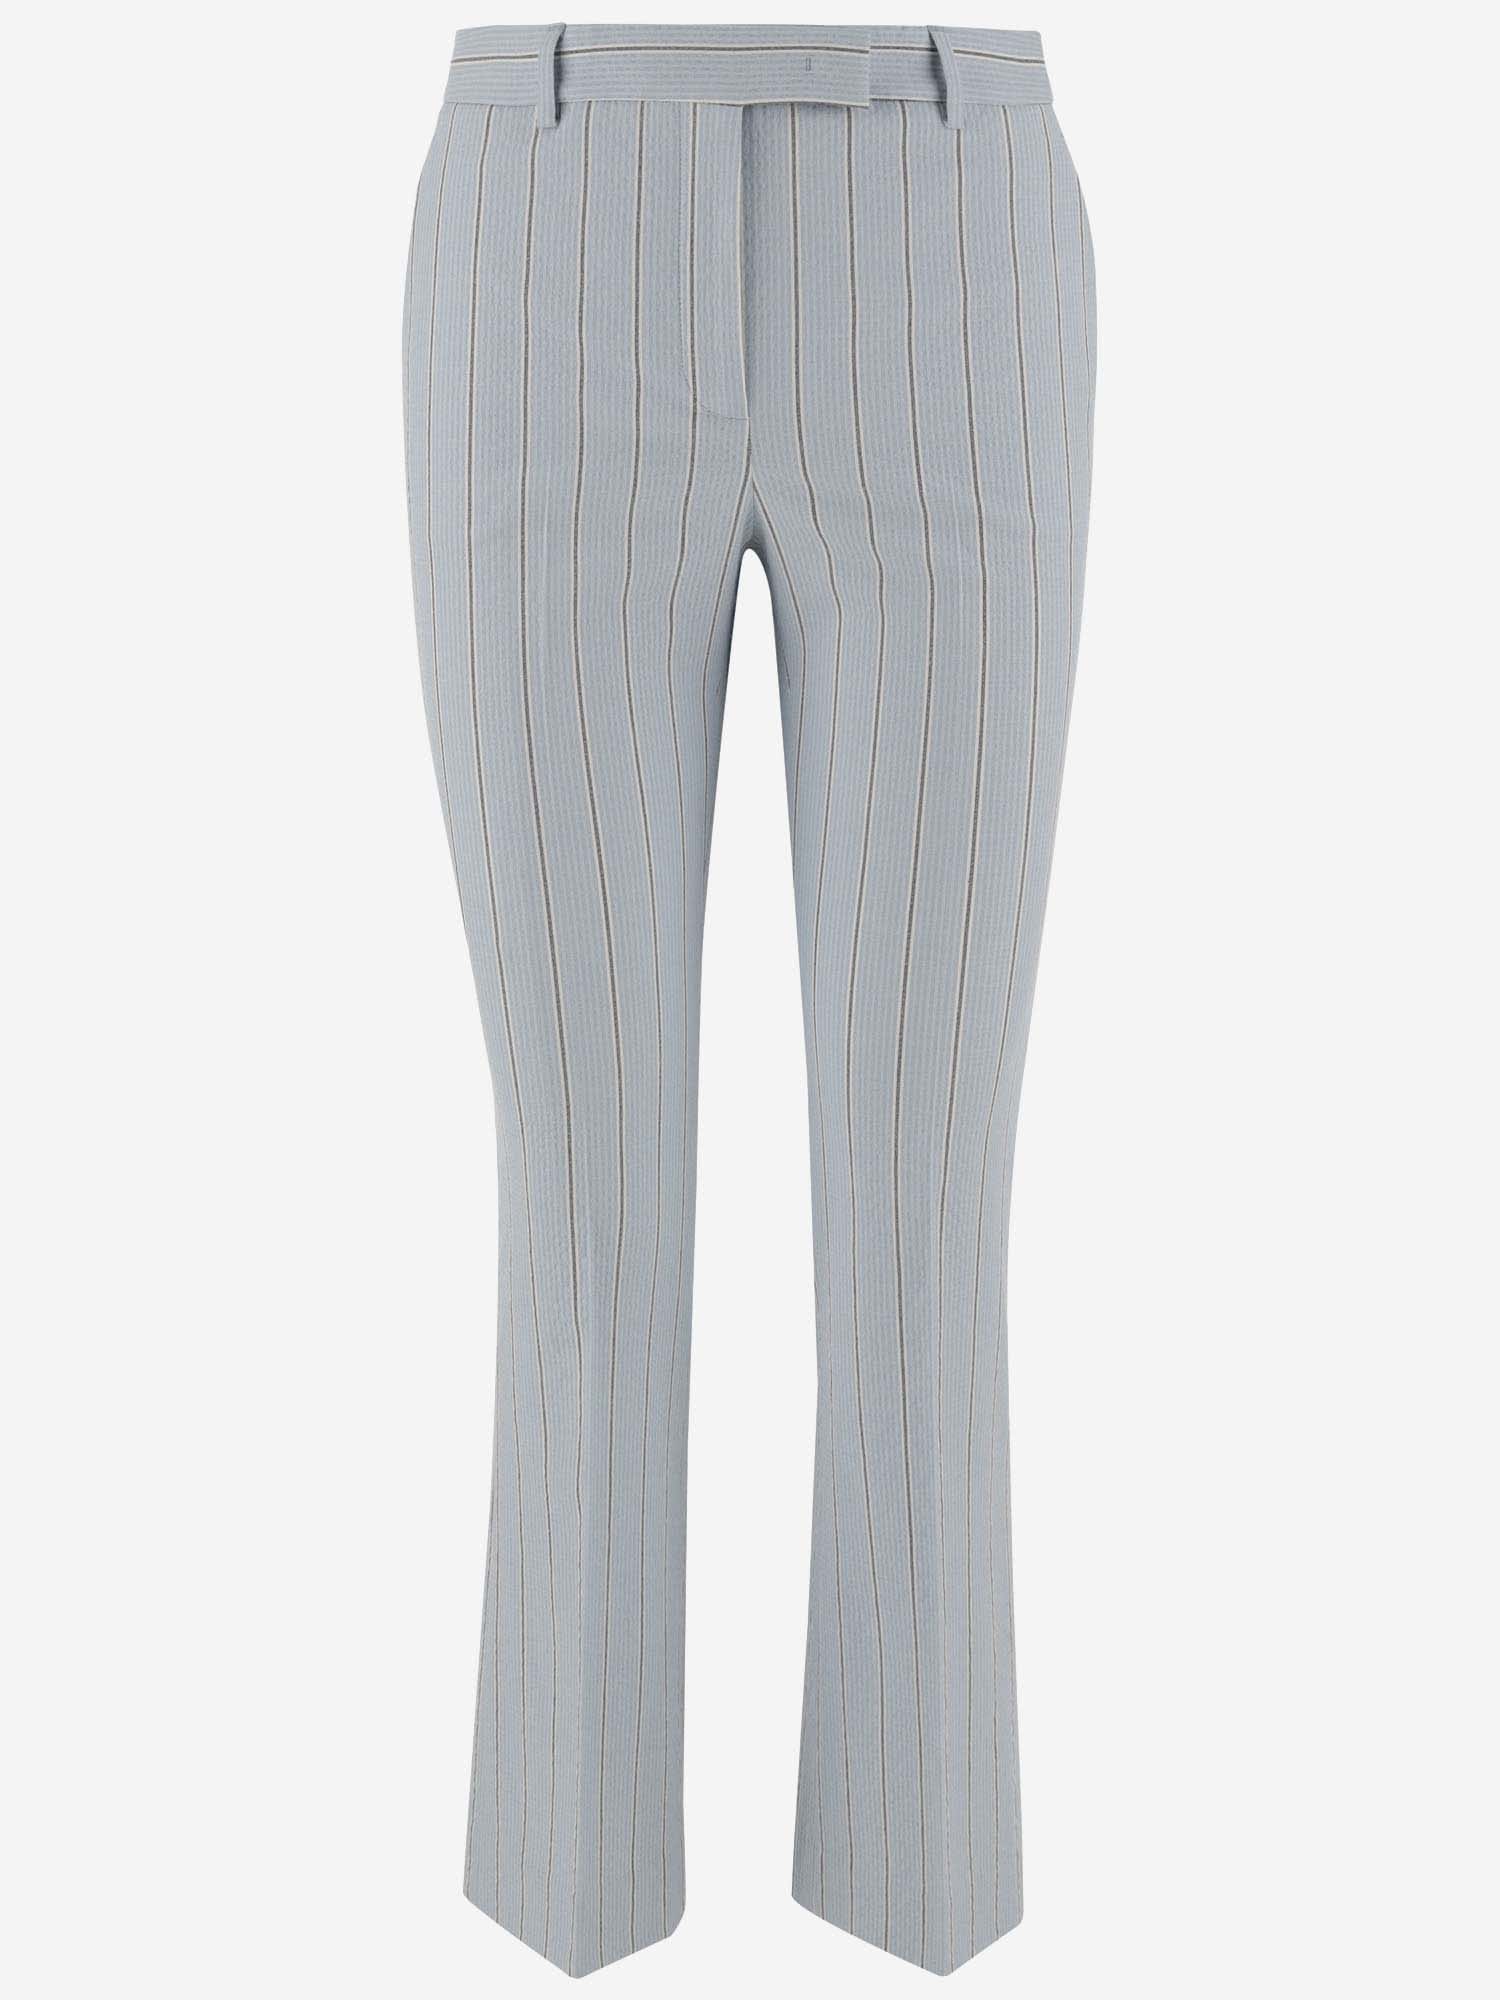 Cotton Blend Pants With Striped Pattern